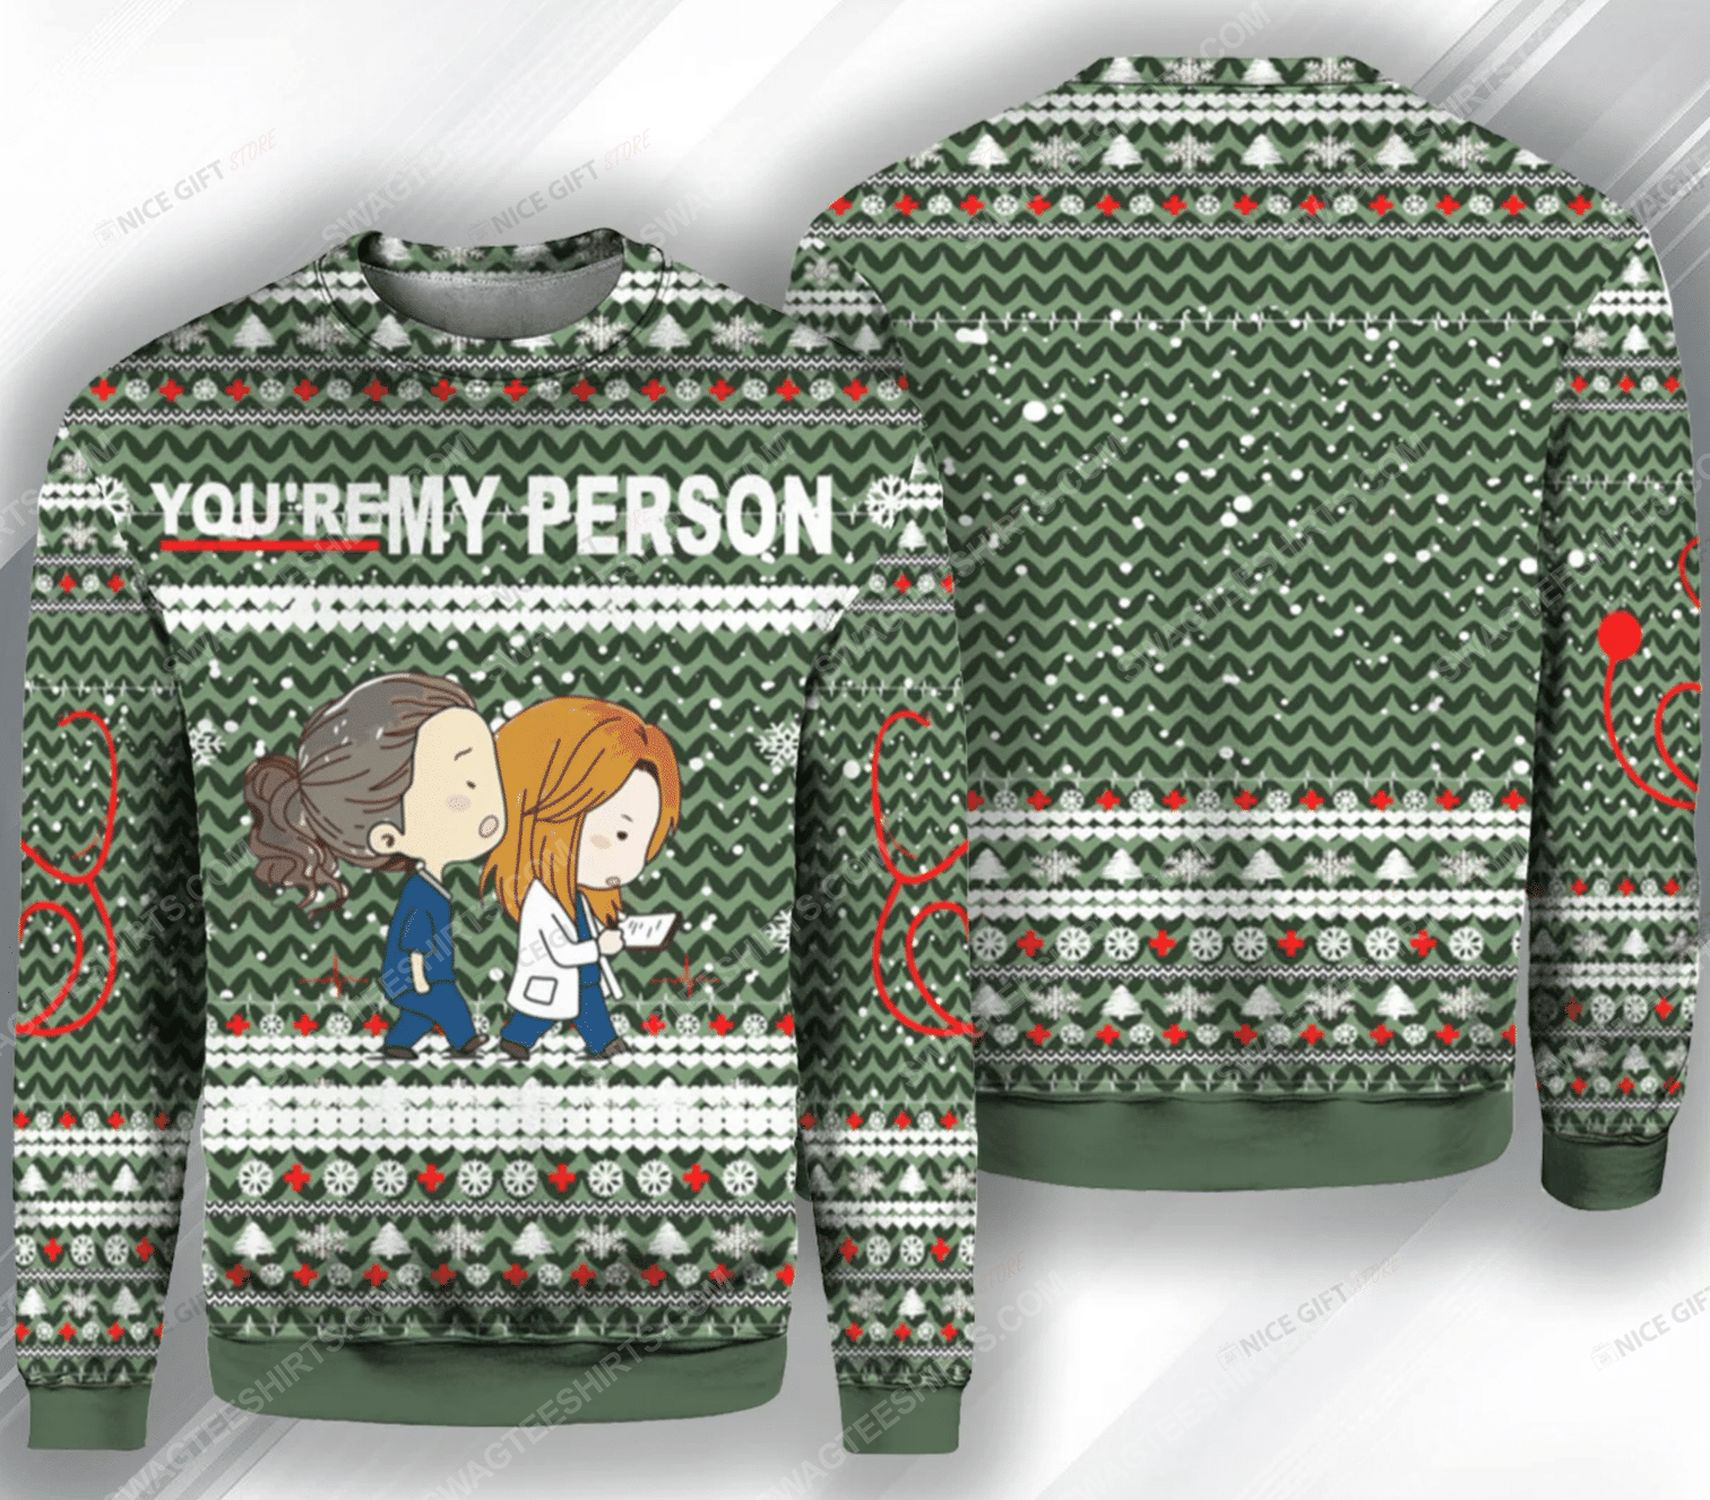 Grey's anatomy tv show you're my person ugly christmas sweater 1 - Copy (2)